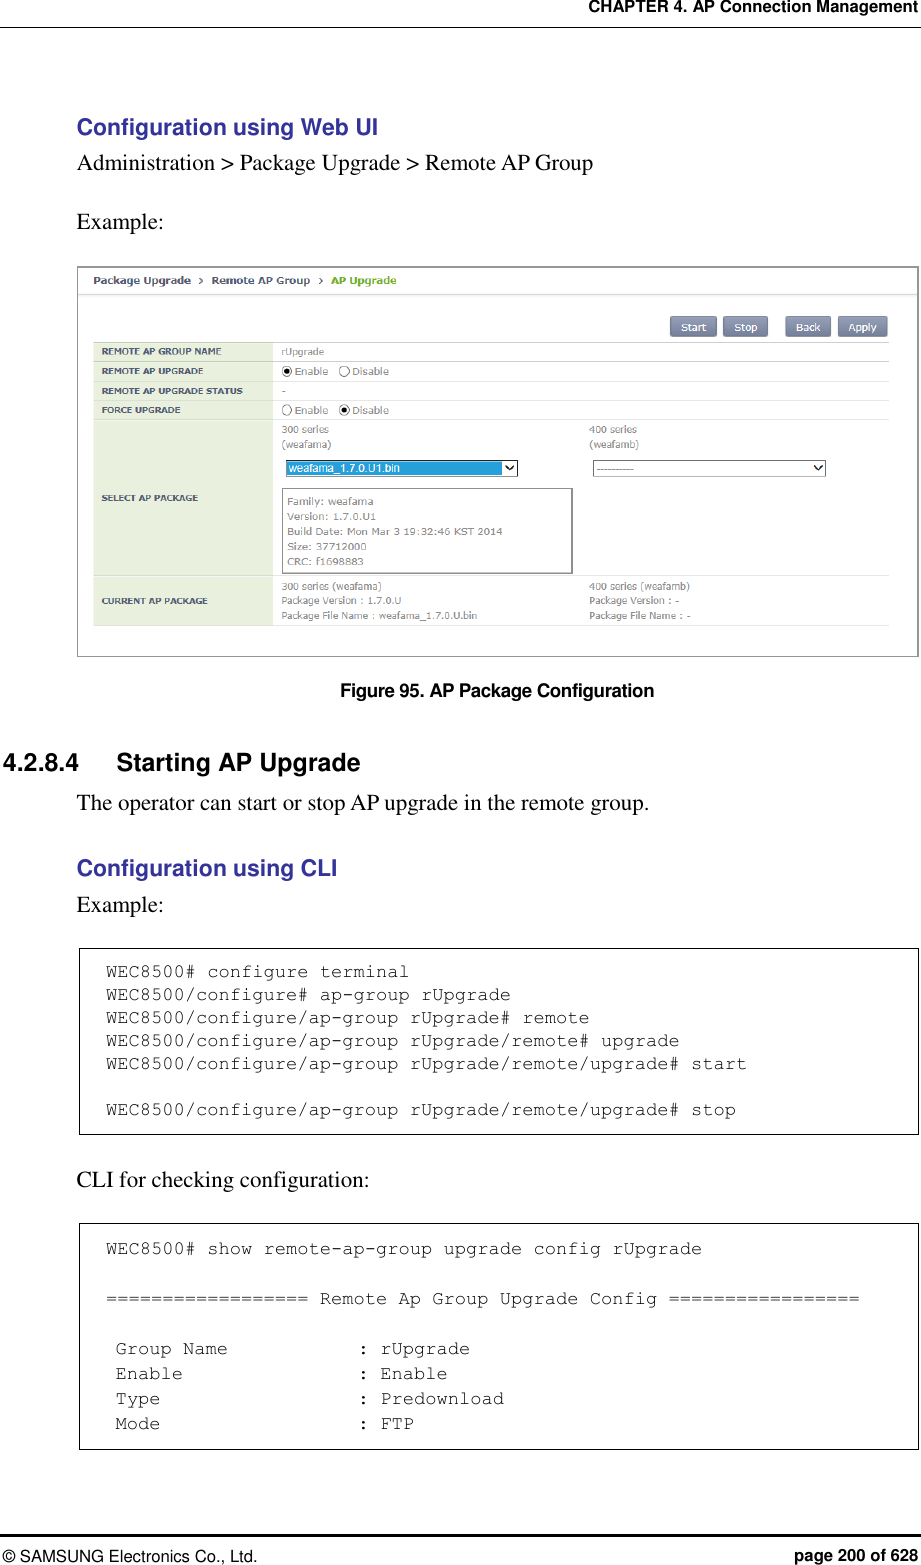 CHAPTER 4. AP Connection Management ©  SAMSUNG Electronics Co., Ltd.  page 200 of 628 Configuration using Web UI Administration &gt; Package Upgrade &gt; Remote AP Group  Example:  Figure 95. AP Package Configuration  4.2.8.4  Starting AP Upgrade The operator can start or stop AP upgrade in the remote group.  Configuration using CLI   Example:  WEC8500# configure terminal WEC8500/configure# ap-group rUpgrade WEC8500/configure/ap-group rUpgrade# remote WEC8500/configure/ap-group rUpgrade/remote# upgrade WEC8500/configure/ap-group rUpgrade/remote/upgrade# start  WEC8500/configure/ap-group rUpgrade/remote/upgrade# stop  CLI for checking configuration:  WEC8500# show remote-ap-group upgrade config rUpgrade  ================== Remote Ap Group Upgrade Config =================   Group Name              : rUpgrade  Enable                   : Enable  Type                      : Predownload  Mode                      : FTP 